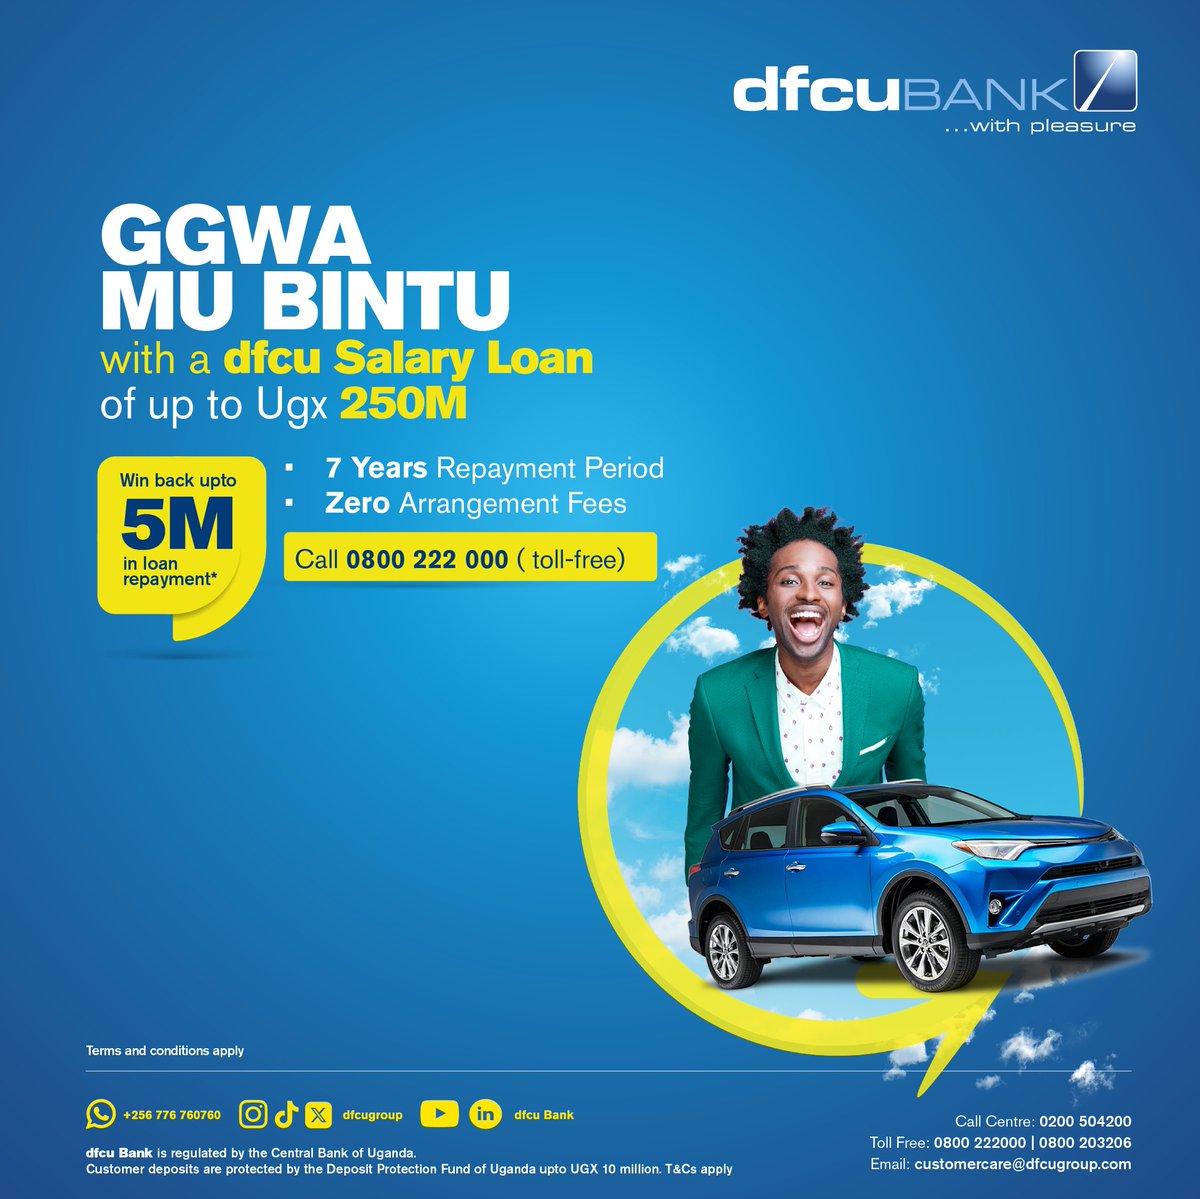 Explore the world with dfcu Unsecured Salary loan. Get up to Ugx 250M for a period of up to 7 years. Visit the promotions link dfcugroup.com/promotions/ to apply now.

@McShammy97 // @Detahhustler23 For the #amtopmwithmcshammy

#GgwaMuBintu #takingyoutothetop